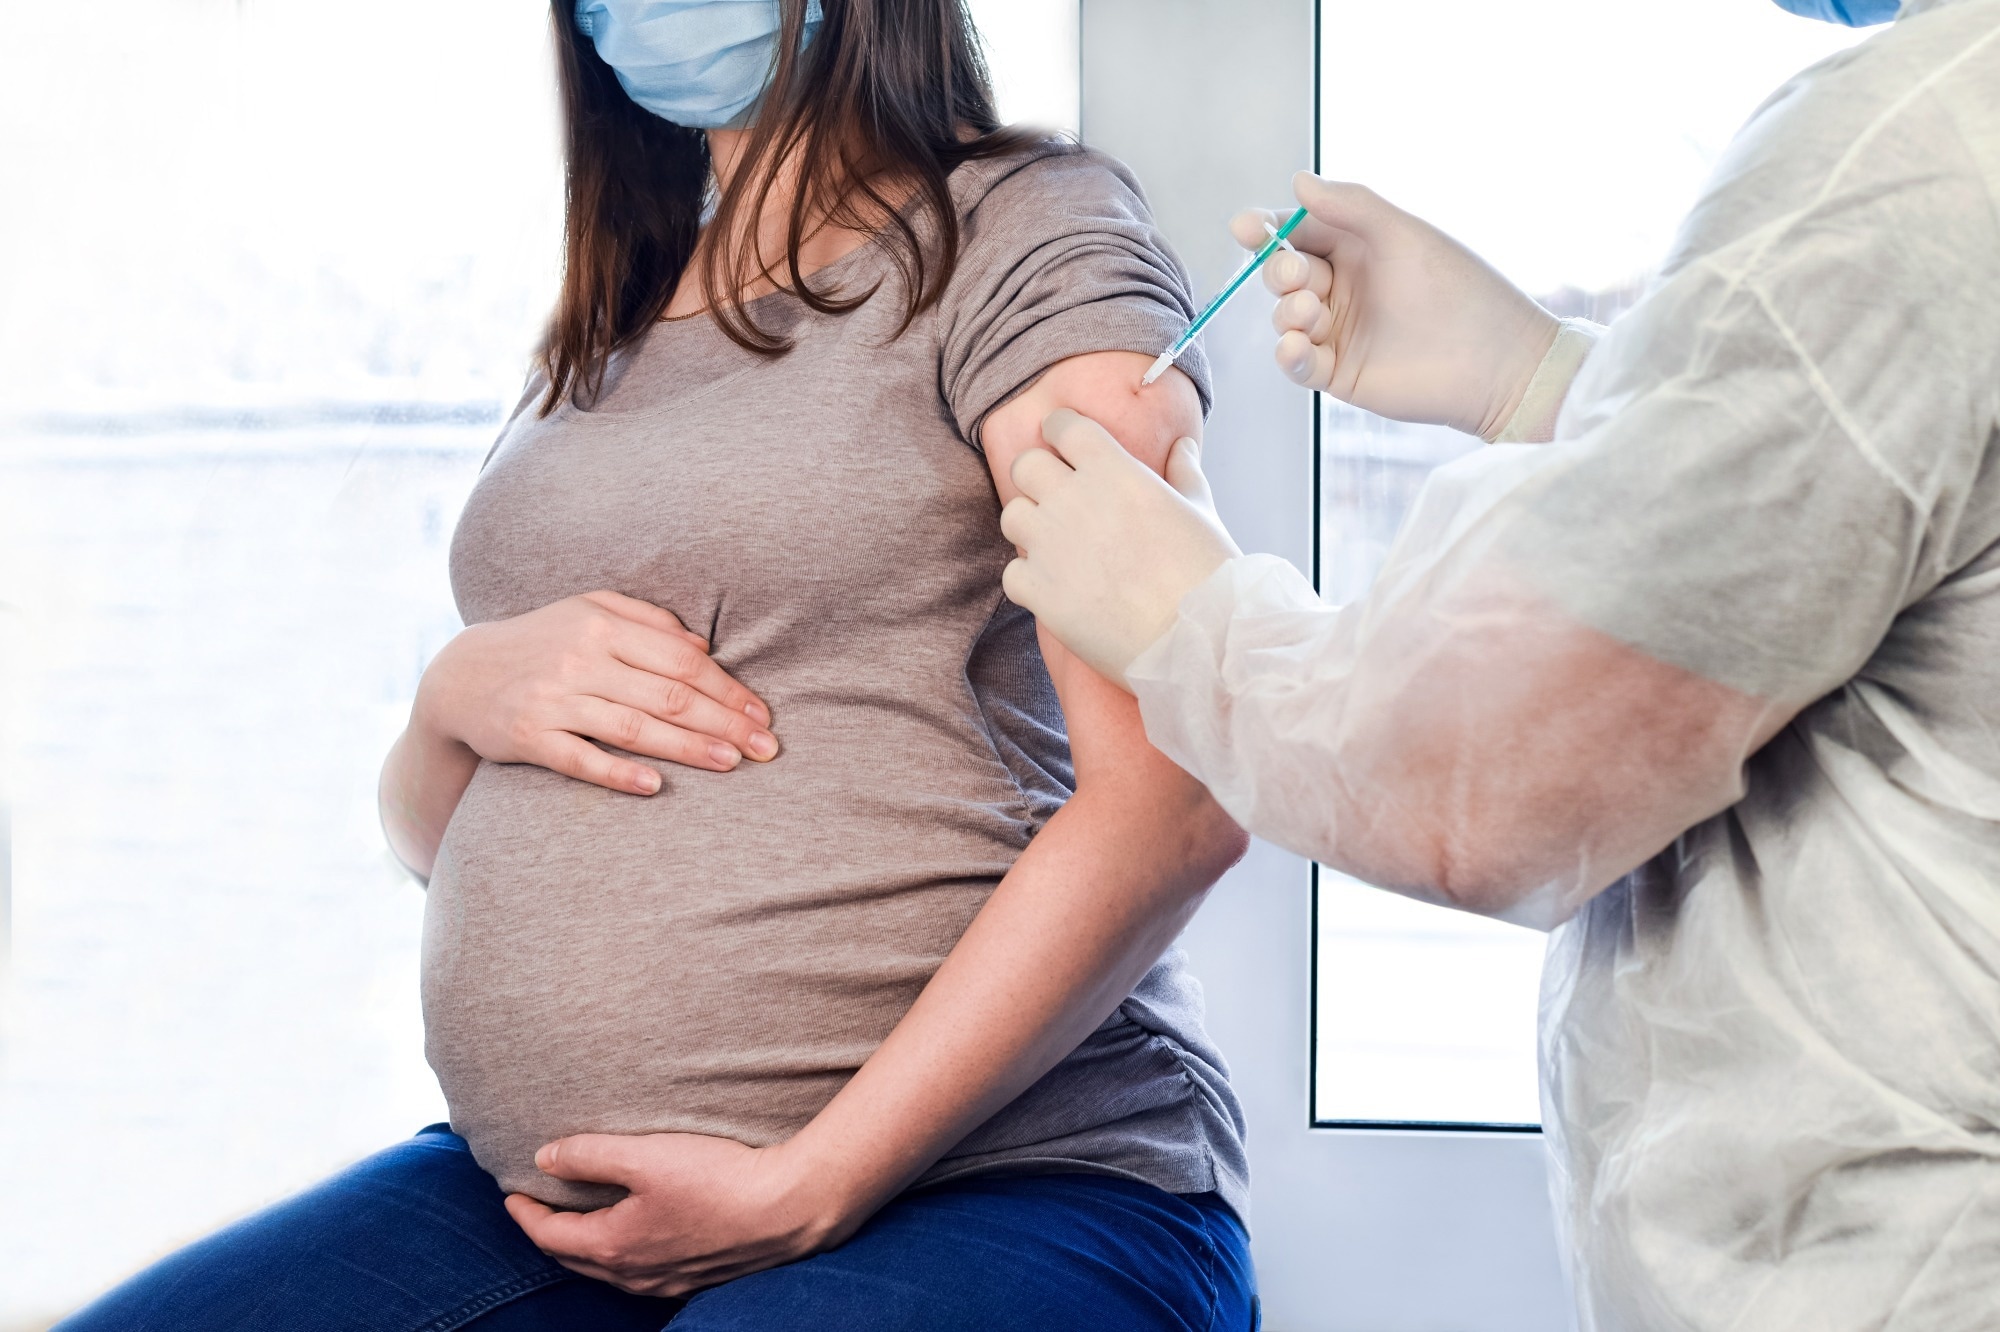 Study: Protecting infants against RSV disease: an impact and cost-effectiveness comparison of long-acting monoclonal antibodies and maternal vaccination. Image Credit: Marina Demidiuk/Shutterstock.com